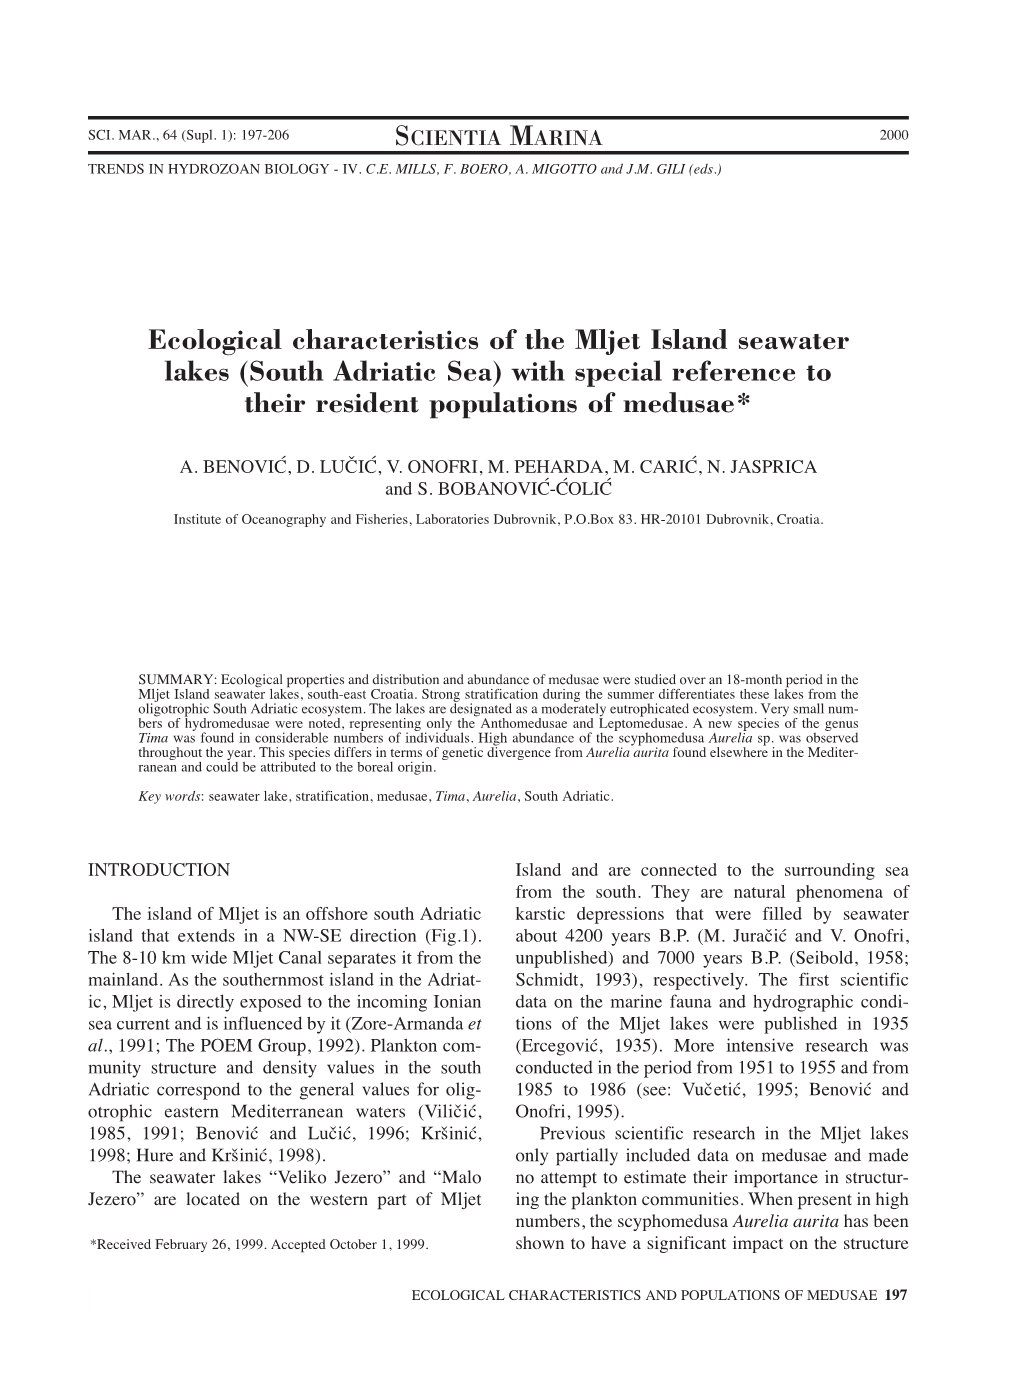 Ecological Characteristics of the Mljet Island Seawater Lakes (South Adriatic Sea) with Special Reference to Their Resident Populations of Medusae*